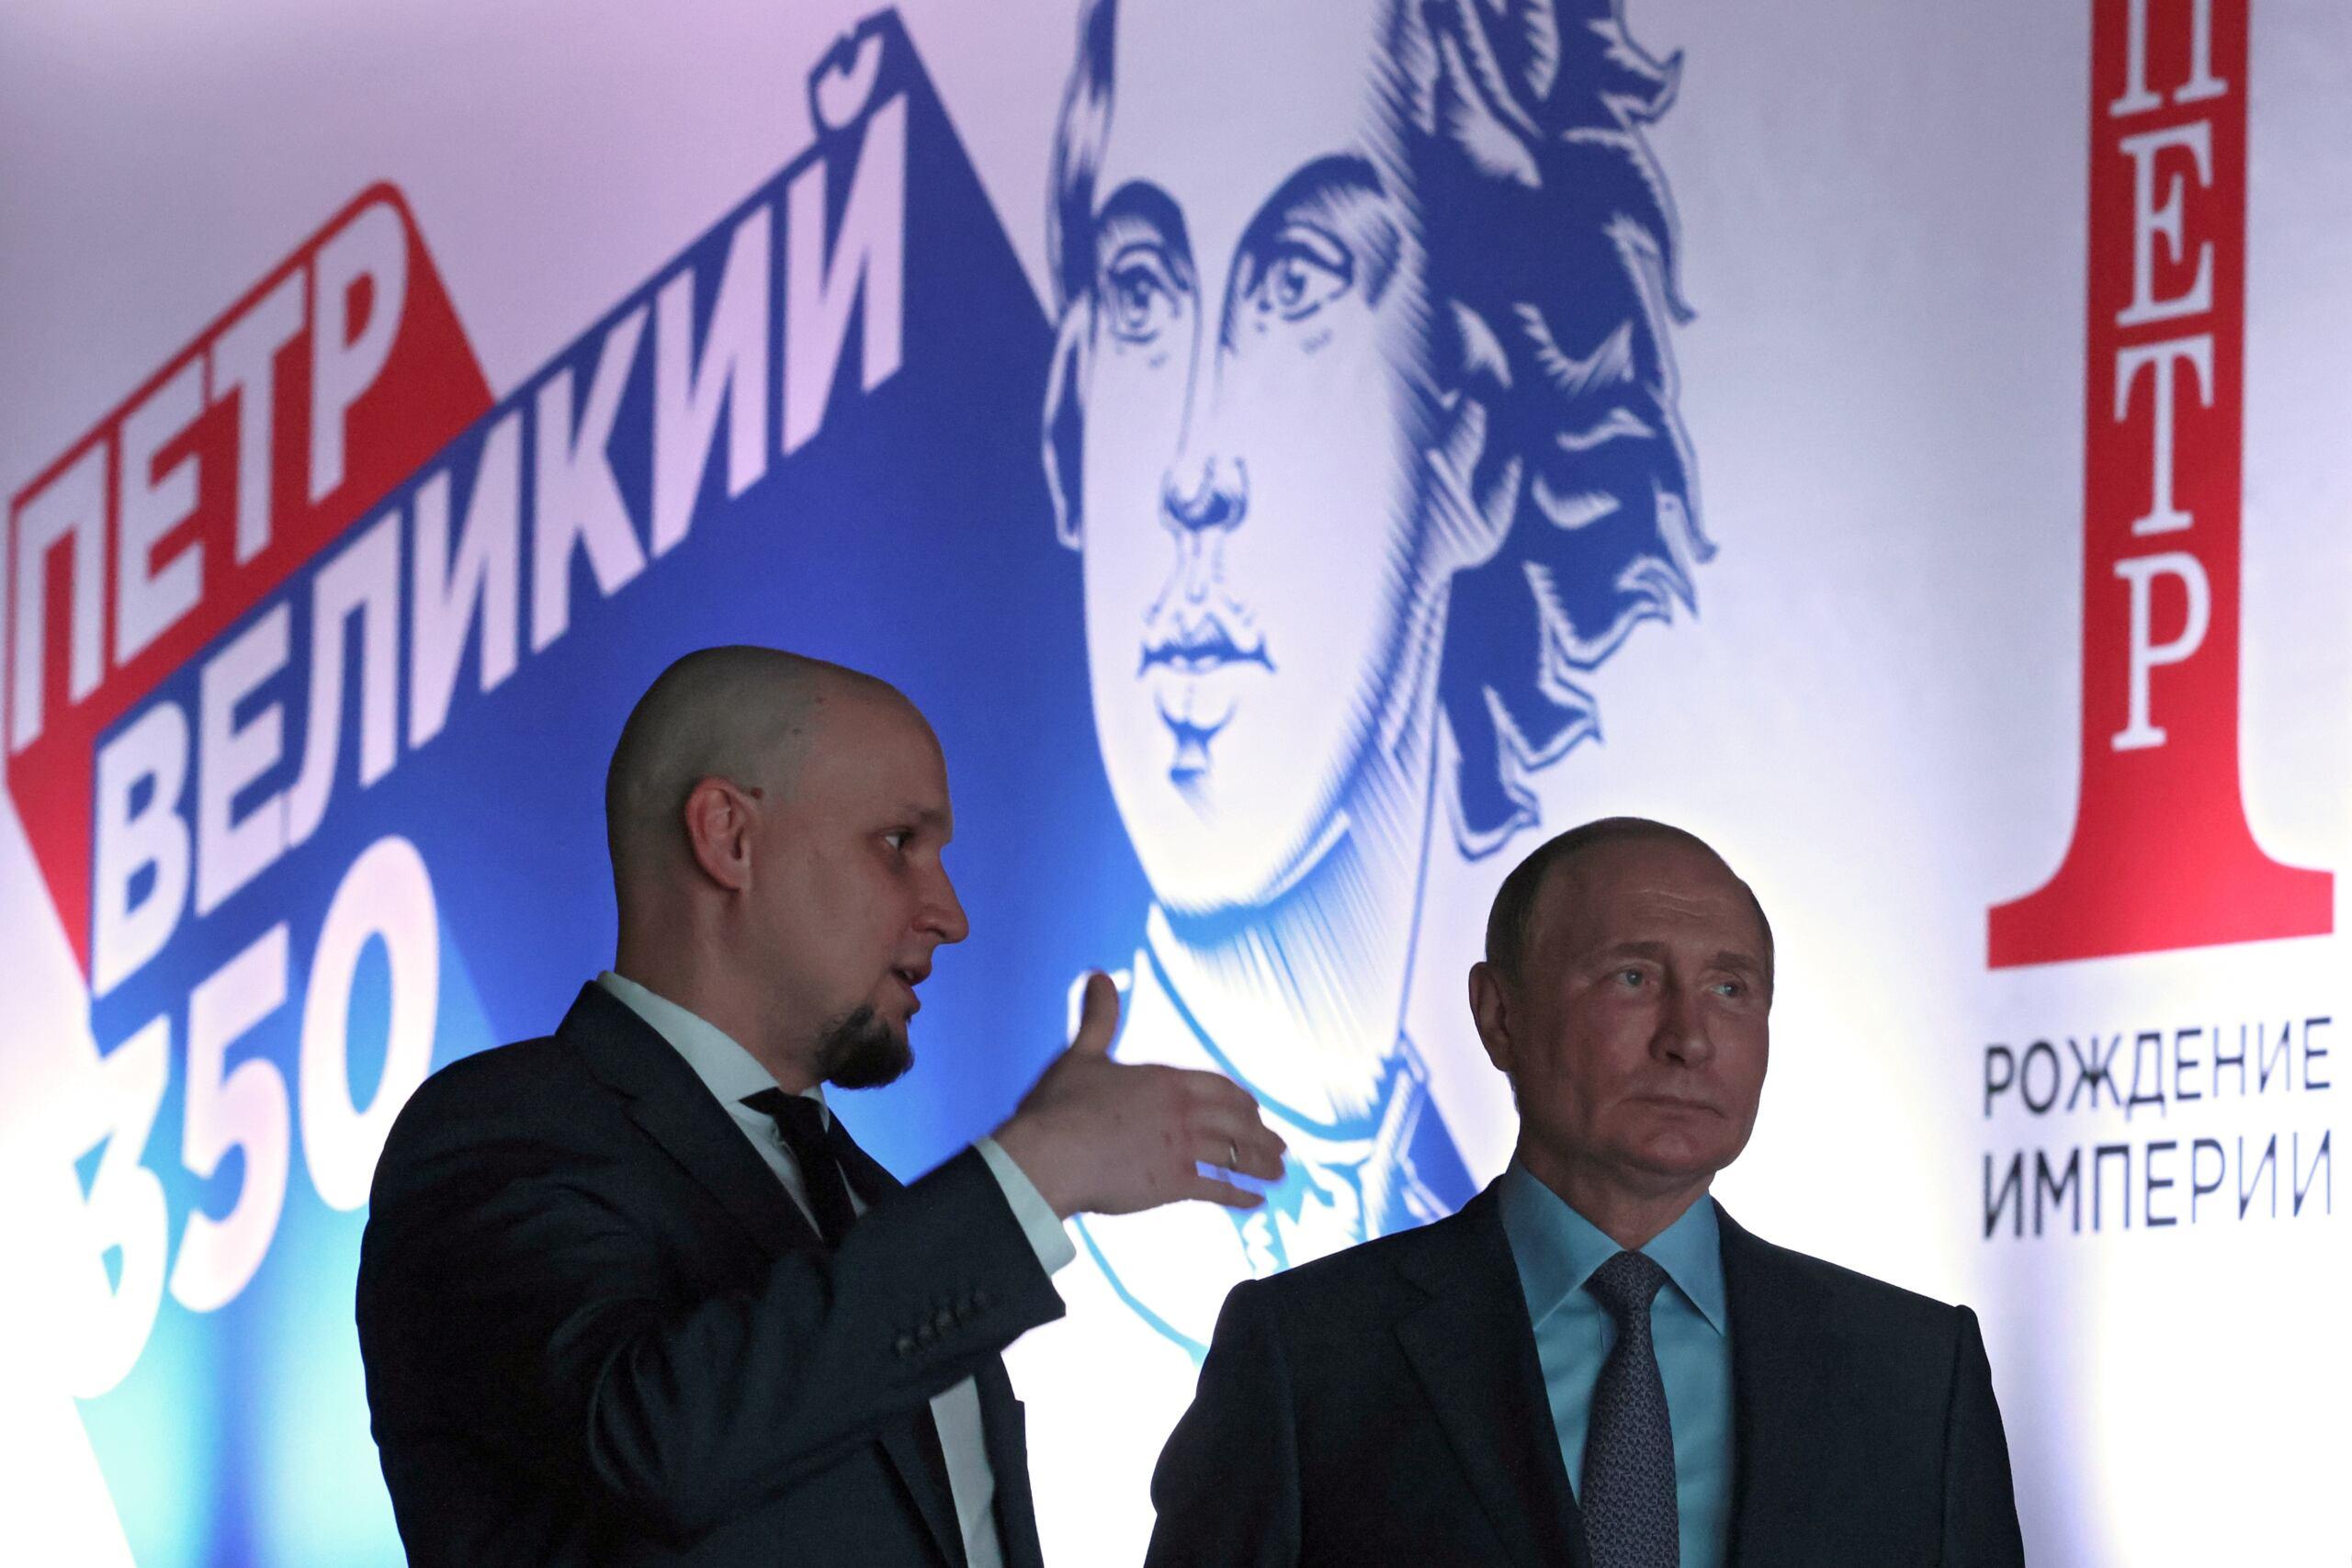 Russian President Vladimir Putin tours a new exhibition dubbed "Peter the Great: The Birth of the Empire" and dedicated to the 350th anniversary of tsar Peter the Great's birth in Moscow on June 9, 2022. (Photo by Mikhail METZEL / SPUTNIK / AFP)